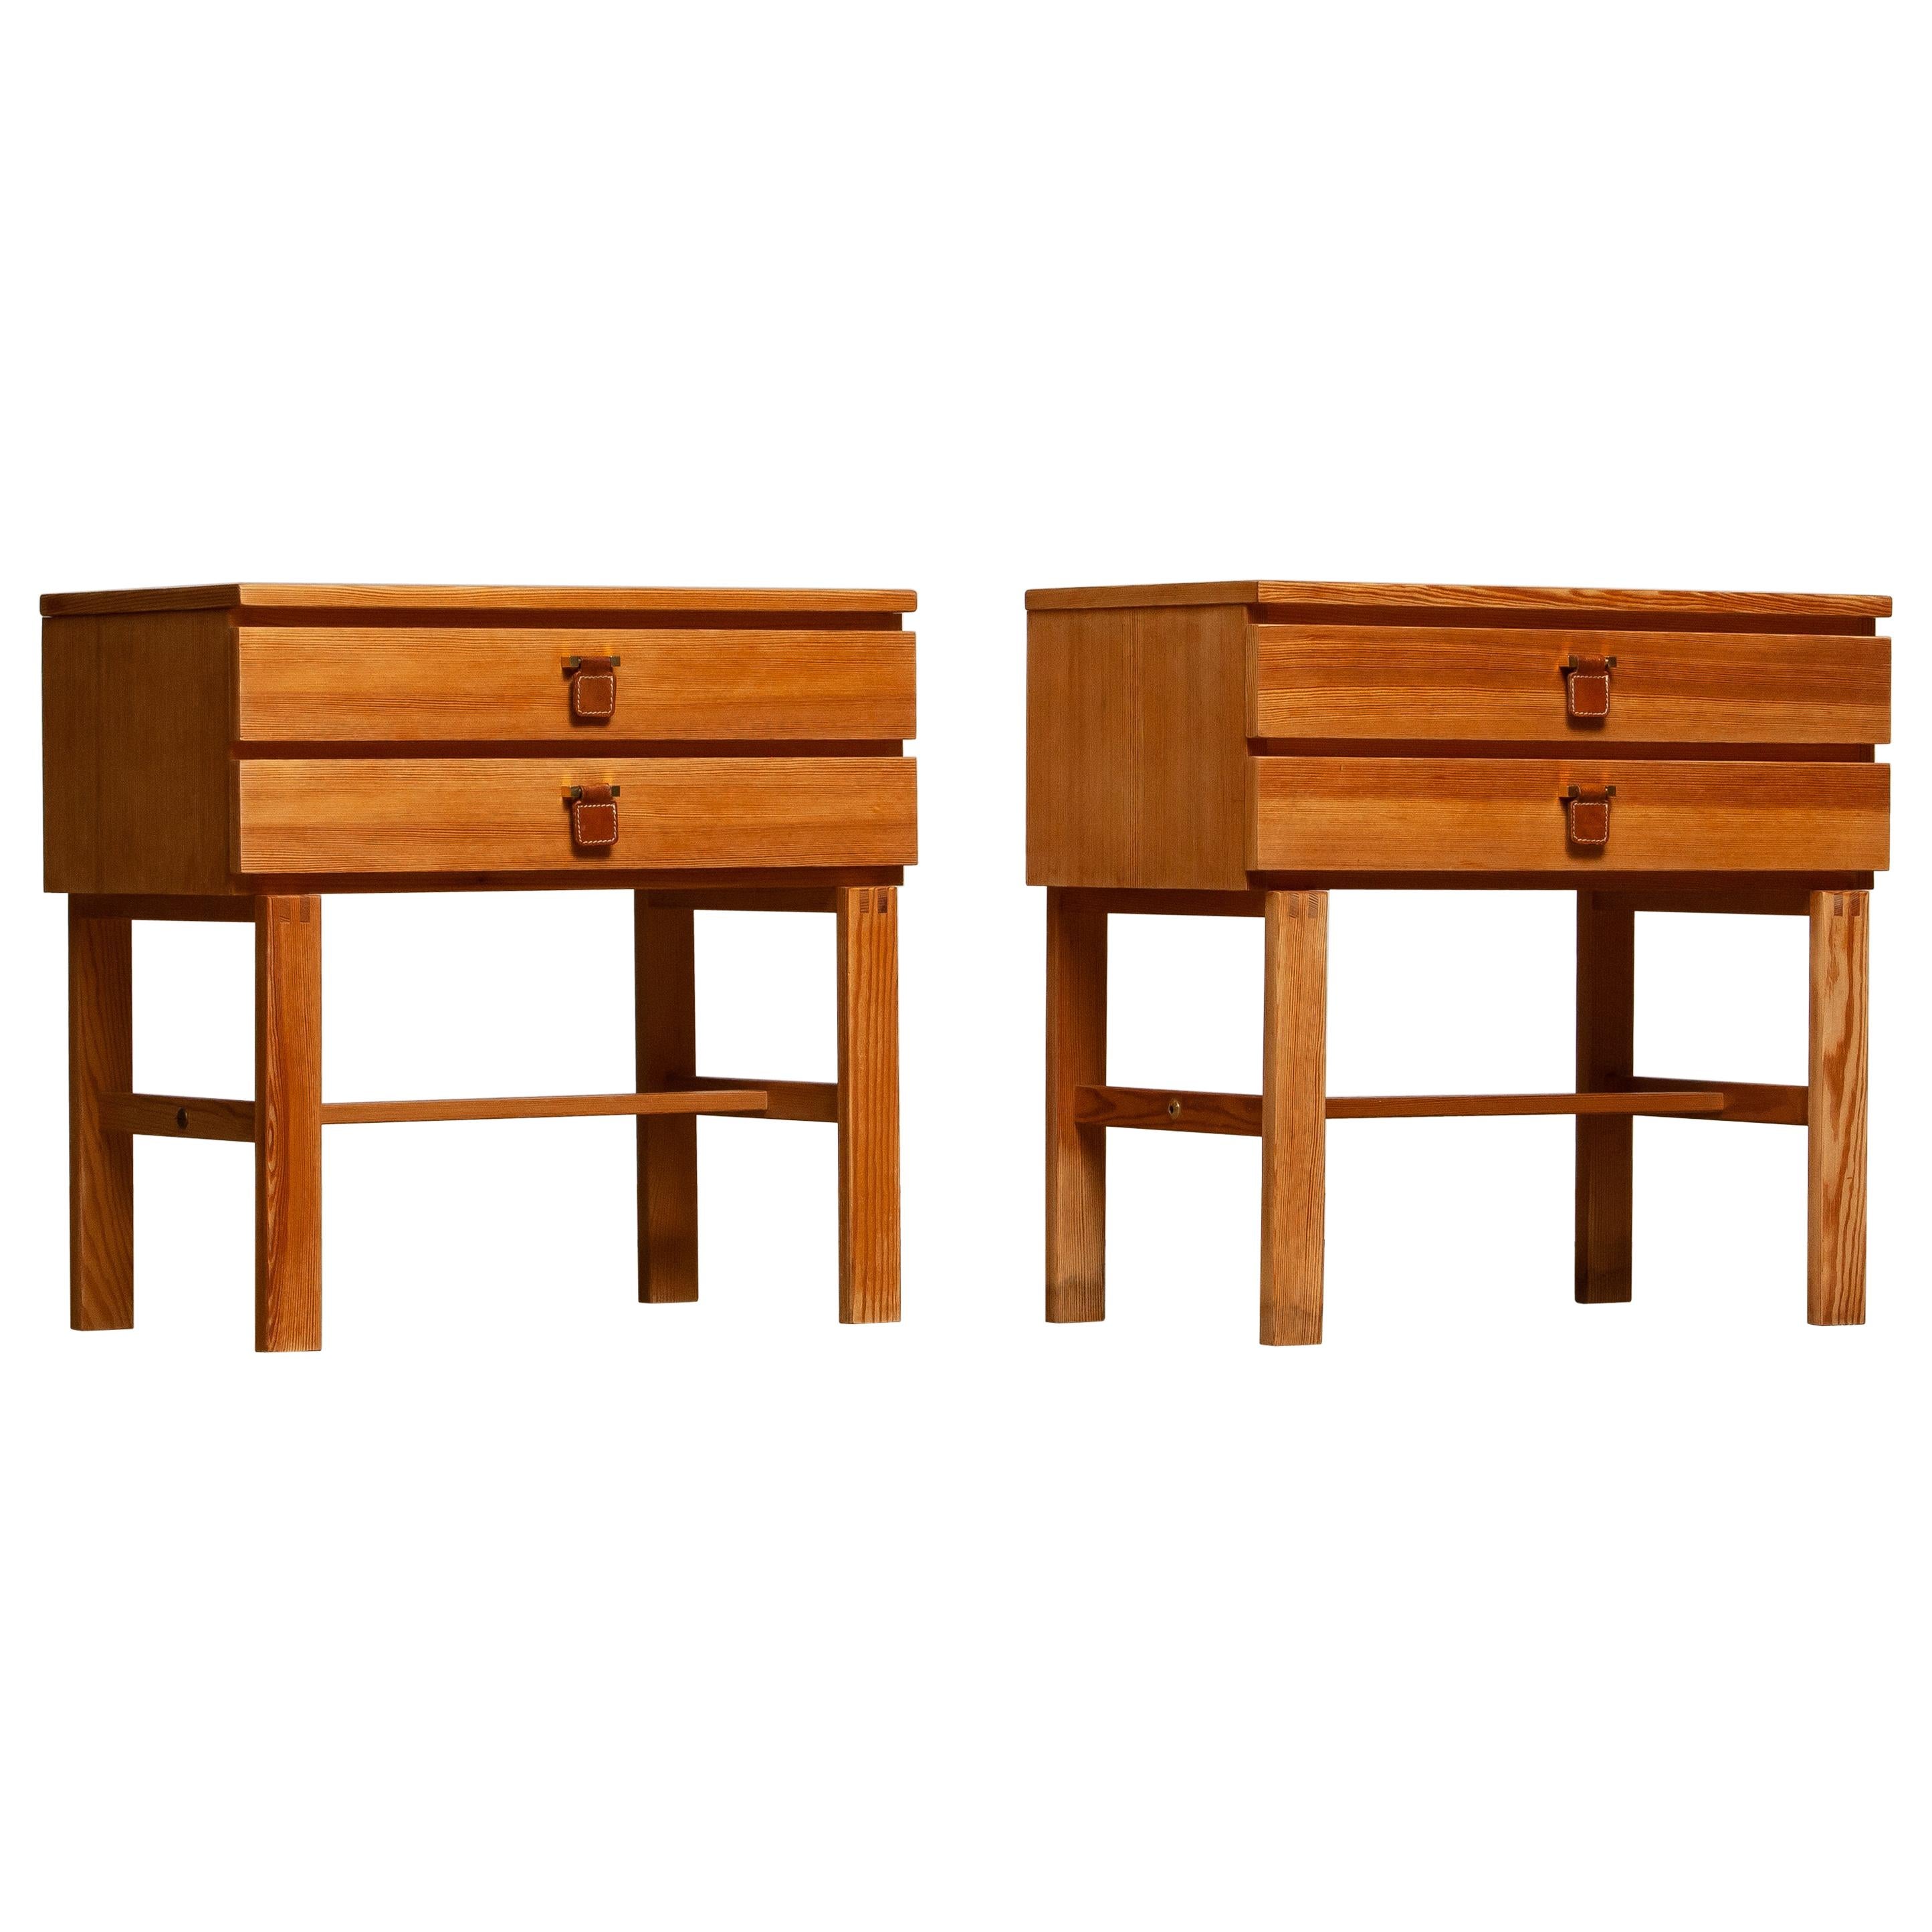 1970s, Pair of Nightstands or Bedside Tables in Pine by Sigurd Göransson Sweden